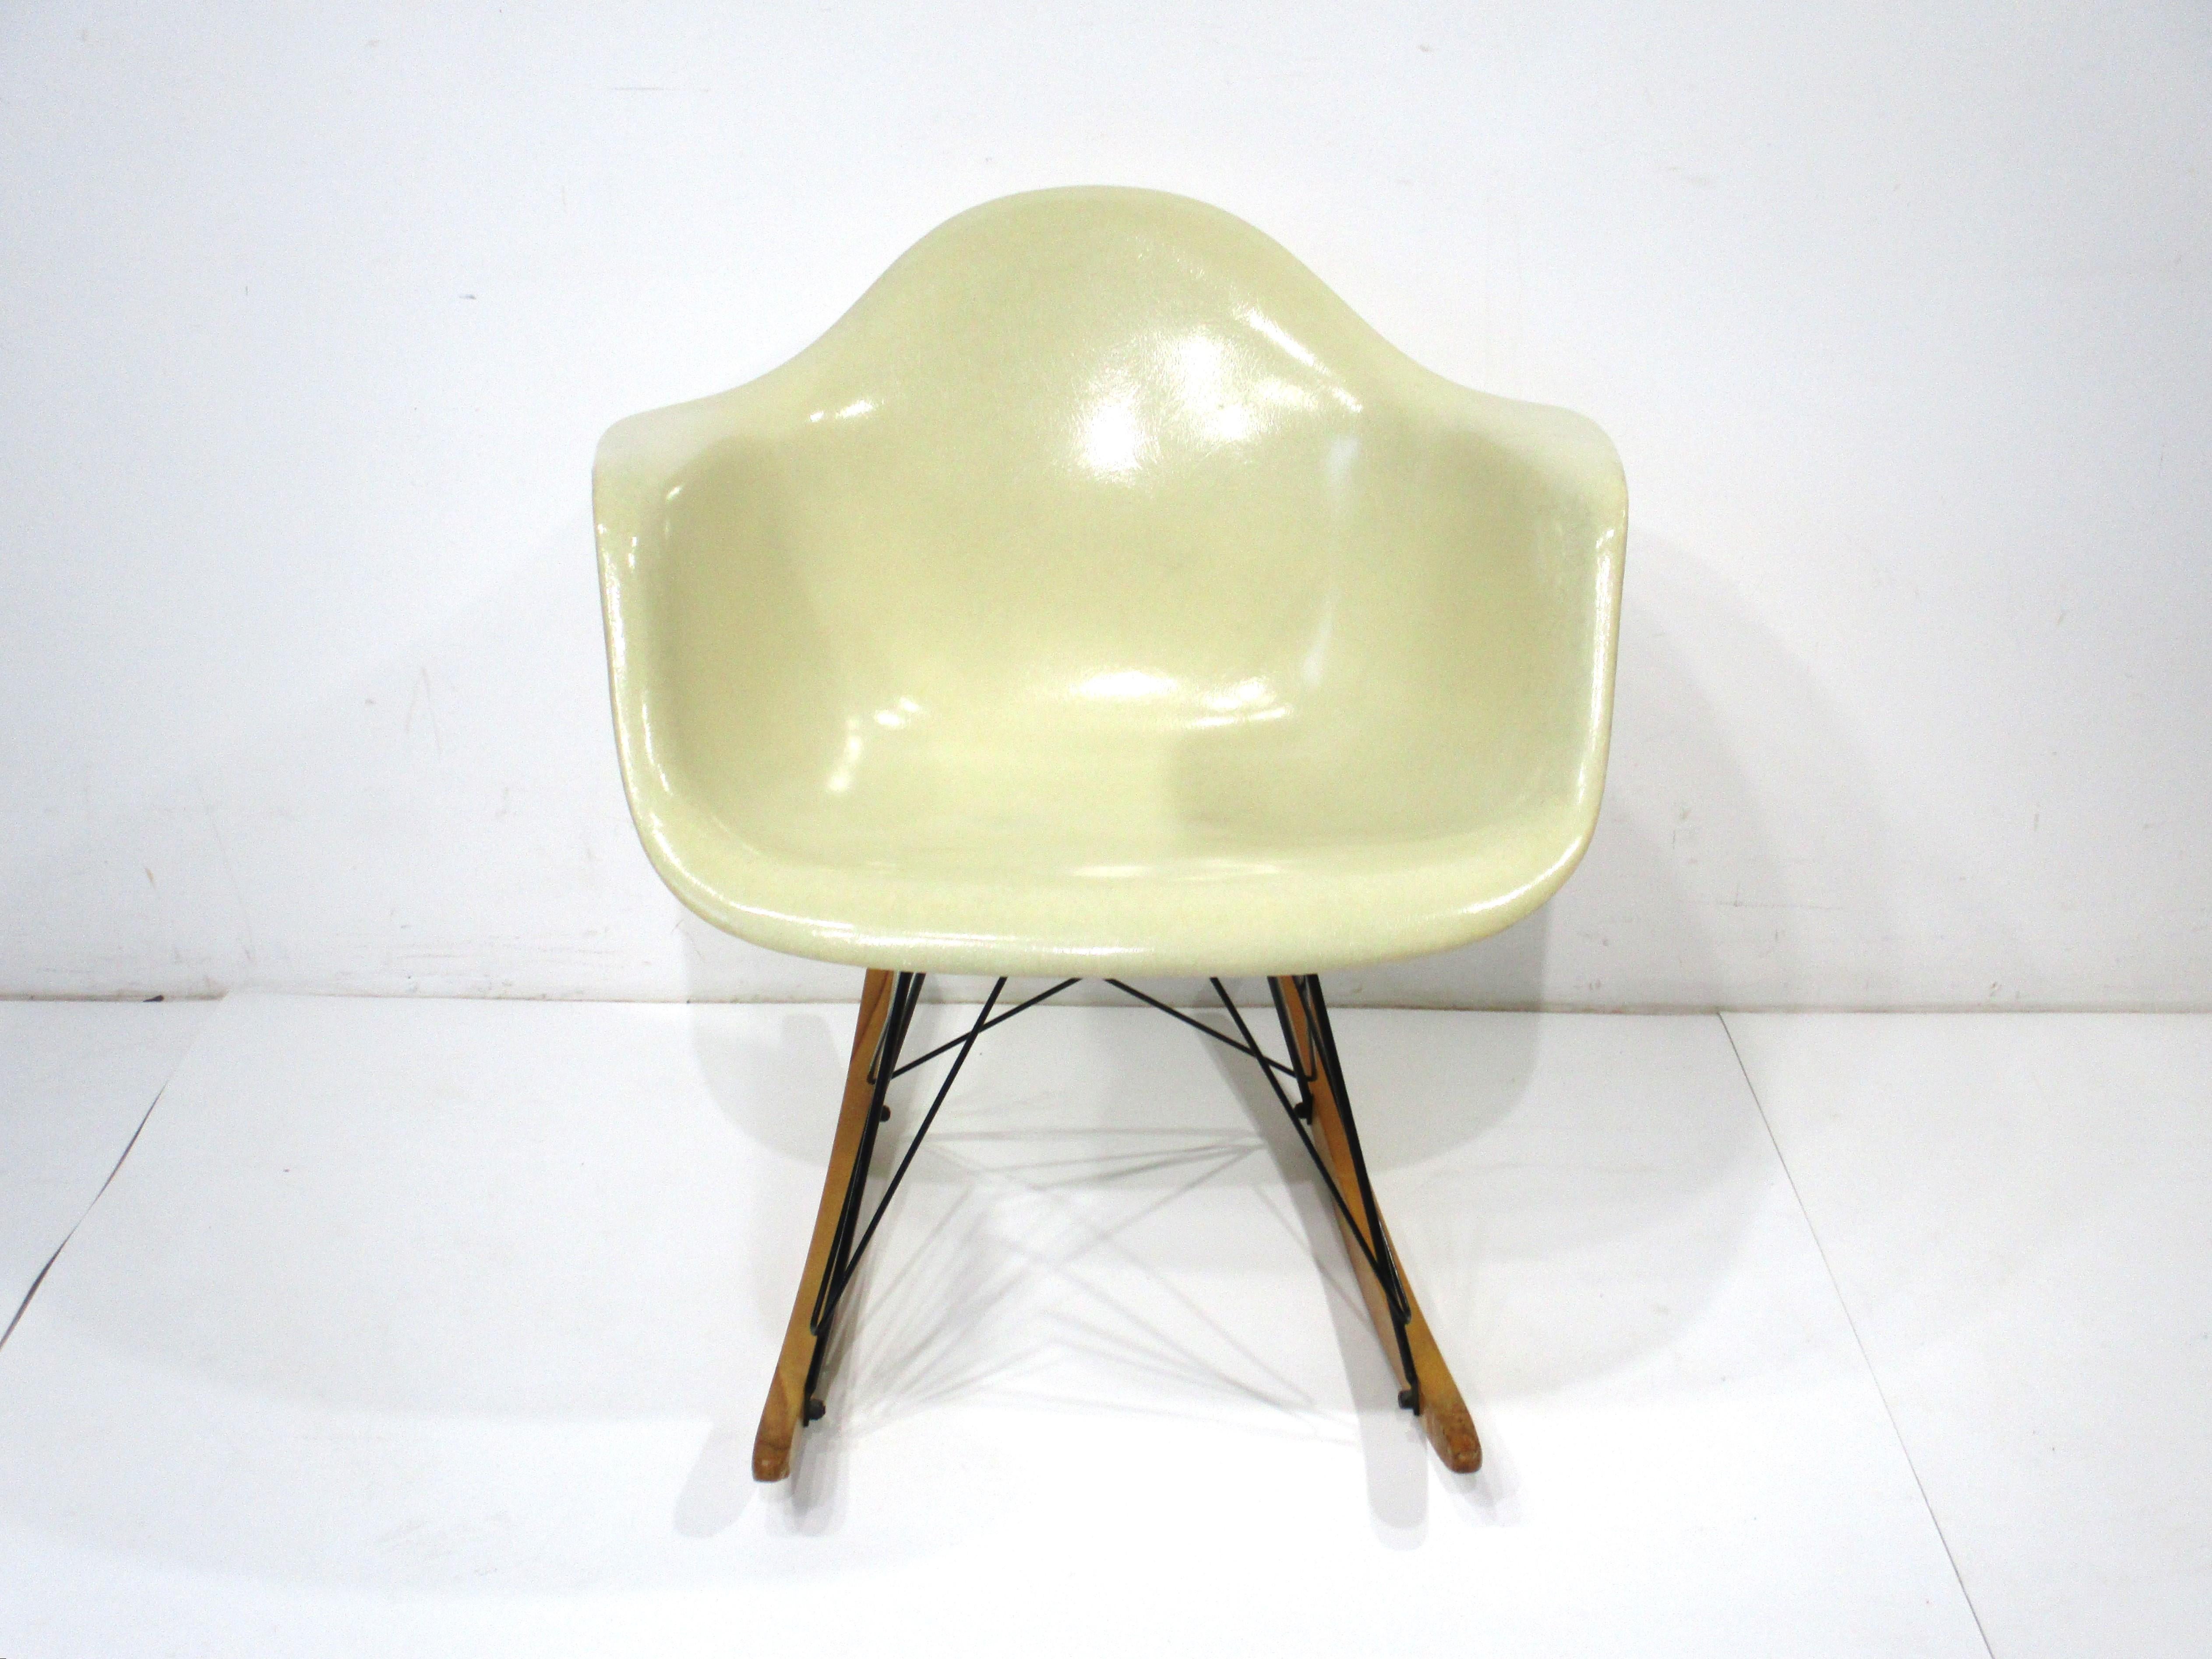 A very nice iconic Mid Century designed molded fiberglass rocking arm shell chair in a parchment color . The satin black base is constructed in metal rods with birch wood runners giving the piece great contrast . Designed by Ray and Charles Eames